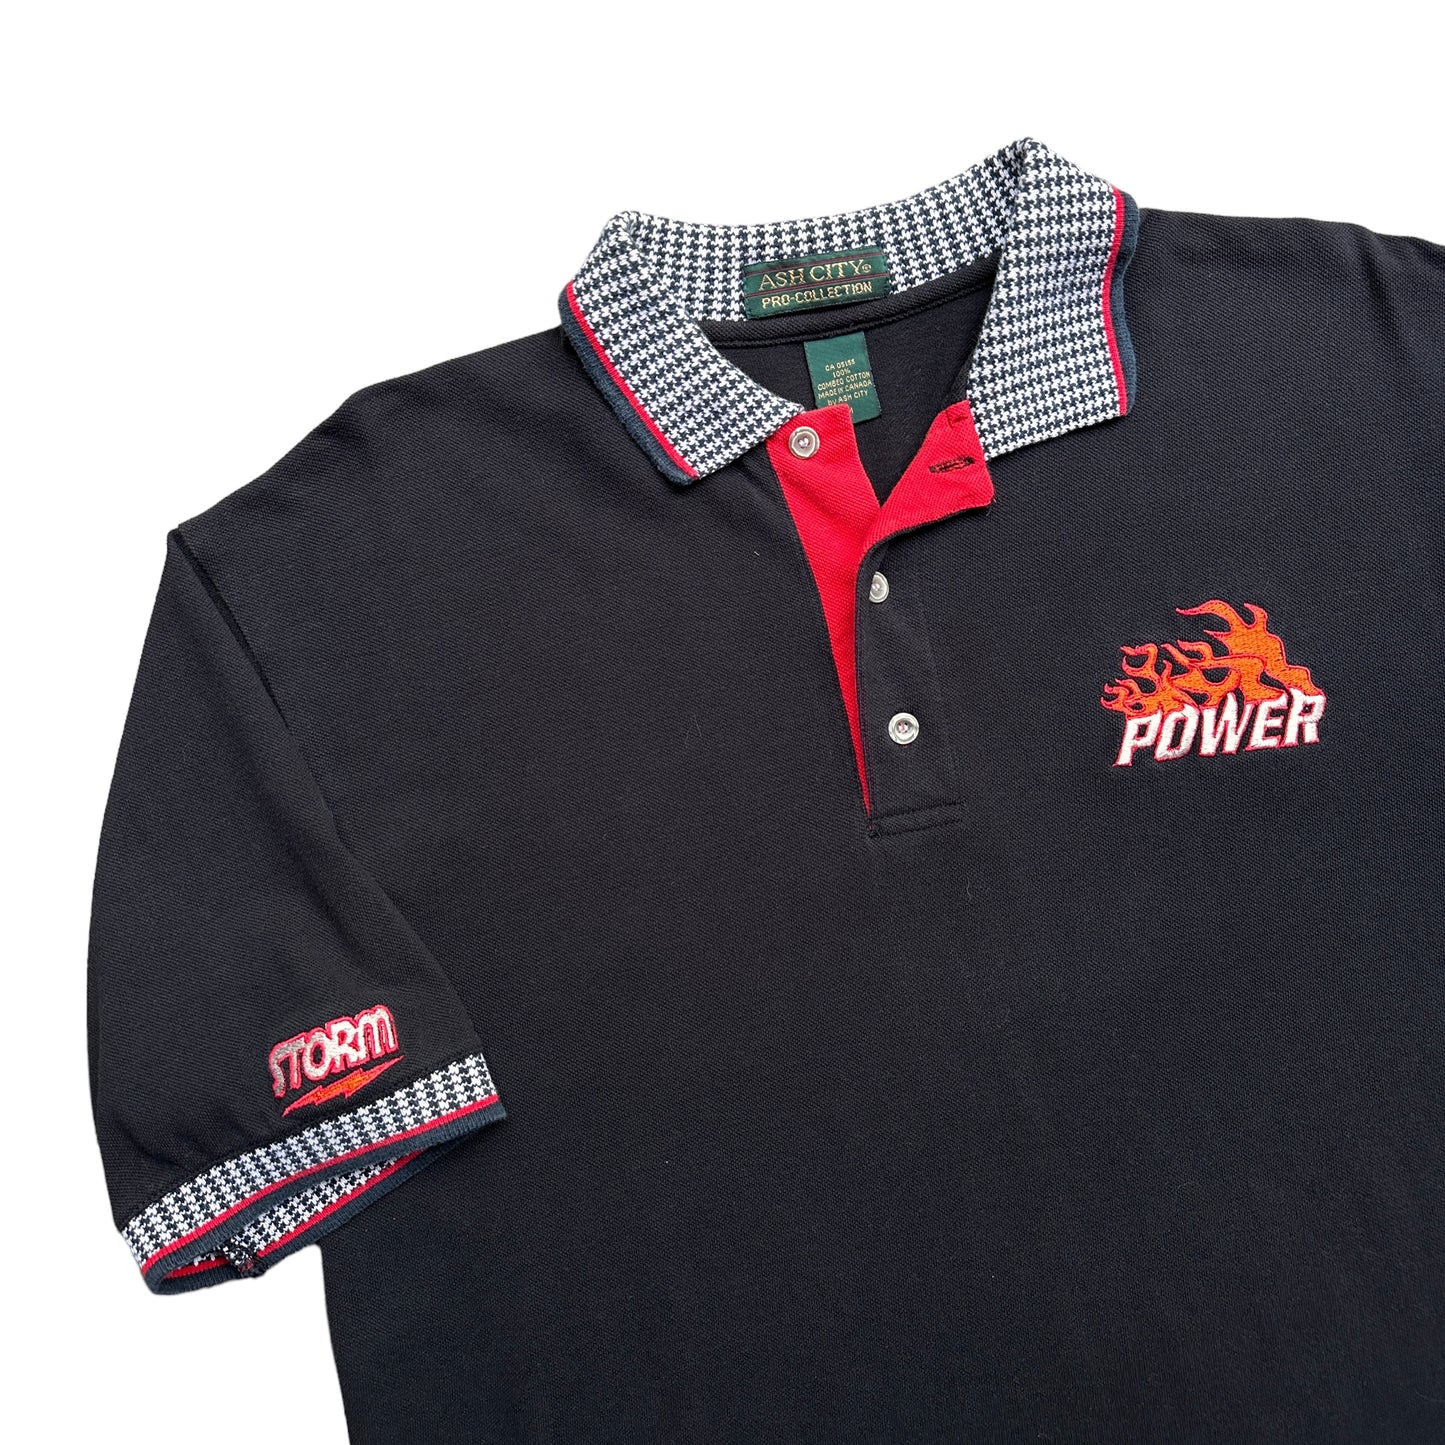 Power storm polo shirt large fit